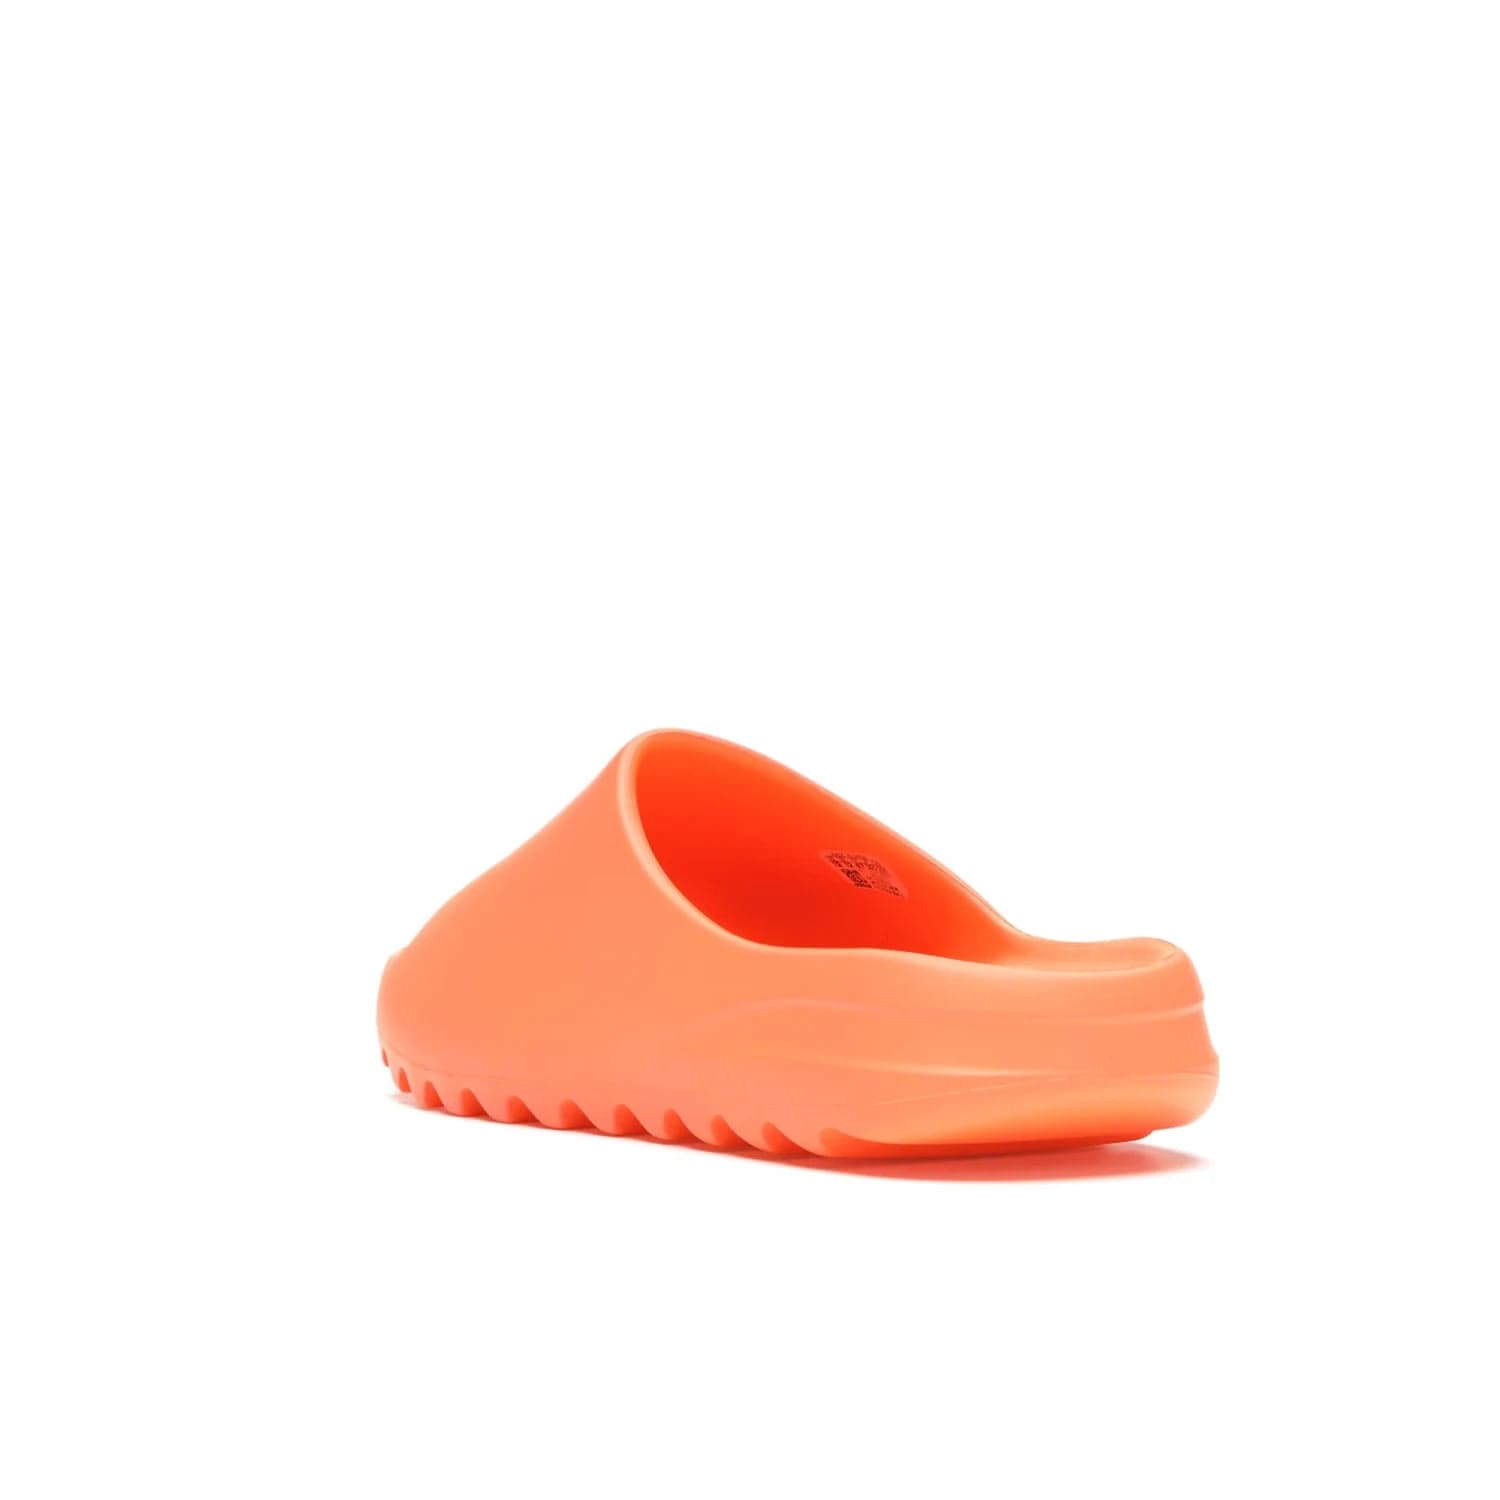 adidas Yeezy Slide Enflame Orange - Image 25 - Only at www.BallersClubKickz.com - Limited edition adidas Yeezy Slide featuring a bold Enflame Orange upper and EVA foam construction. Grooved outsole for traction and support. Released June 2021. Perfect for summer.